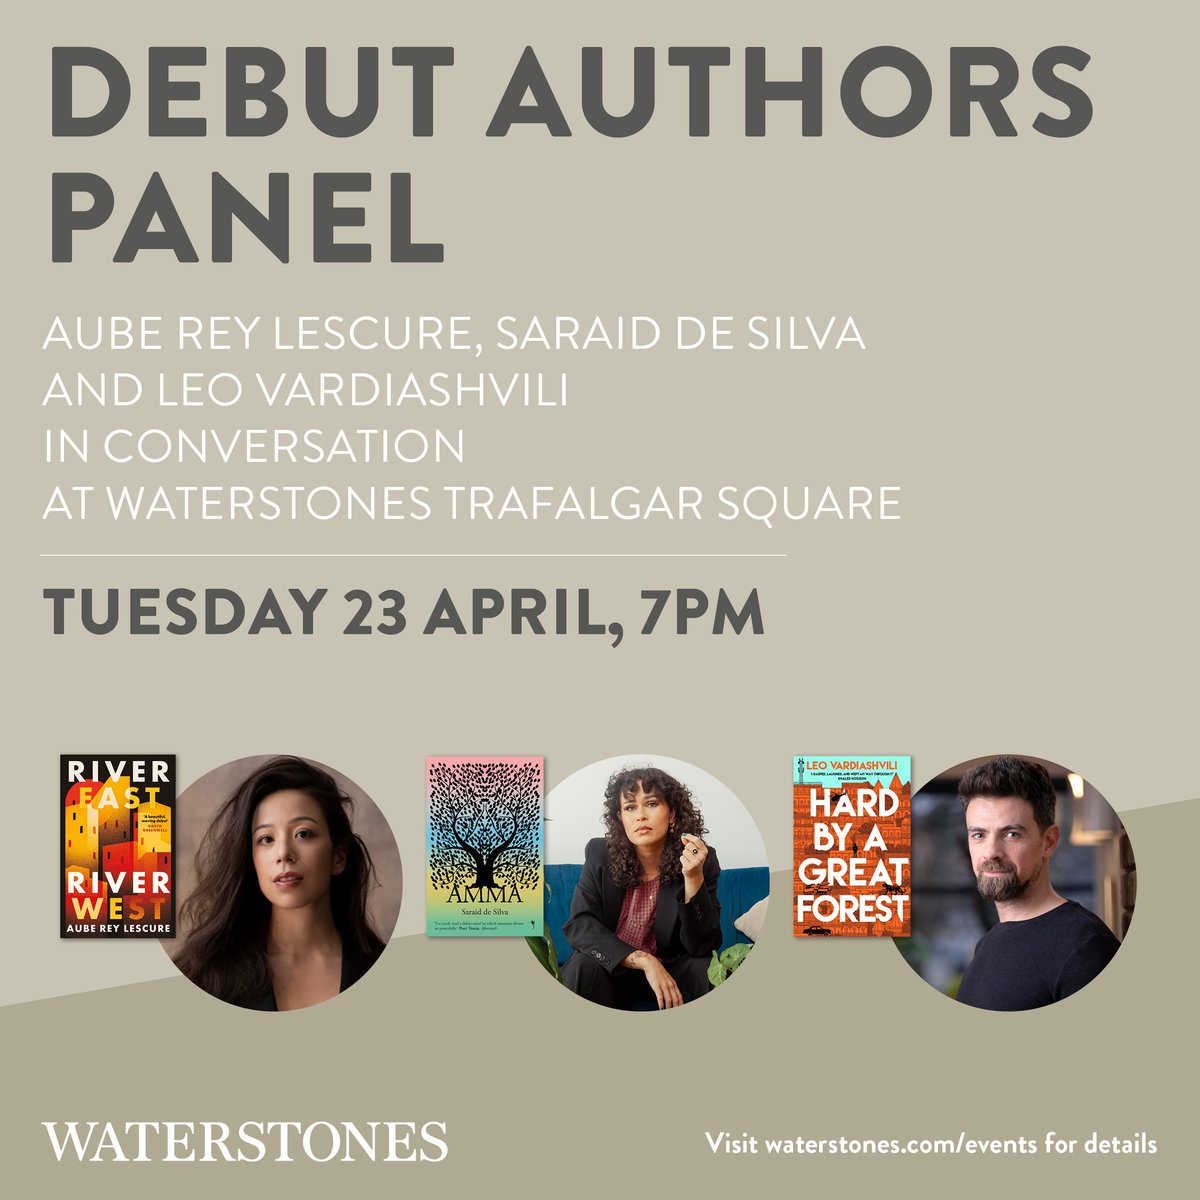 Join us @WaterstonesTraf for an incredible event📢 @AubeReyLescure will be in conversation with 2 brilliant debut authors👏📖👏 📅23 April ⏰7pm 🎟️waterstones.com/events/debut-a…